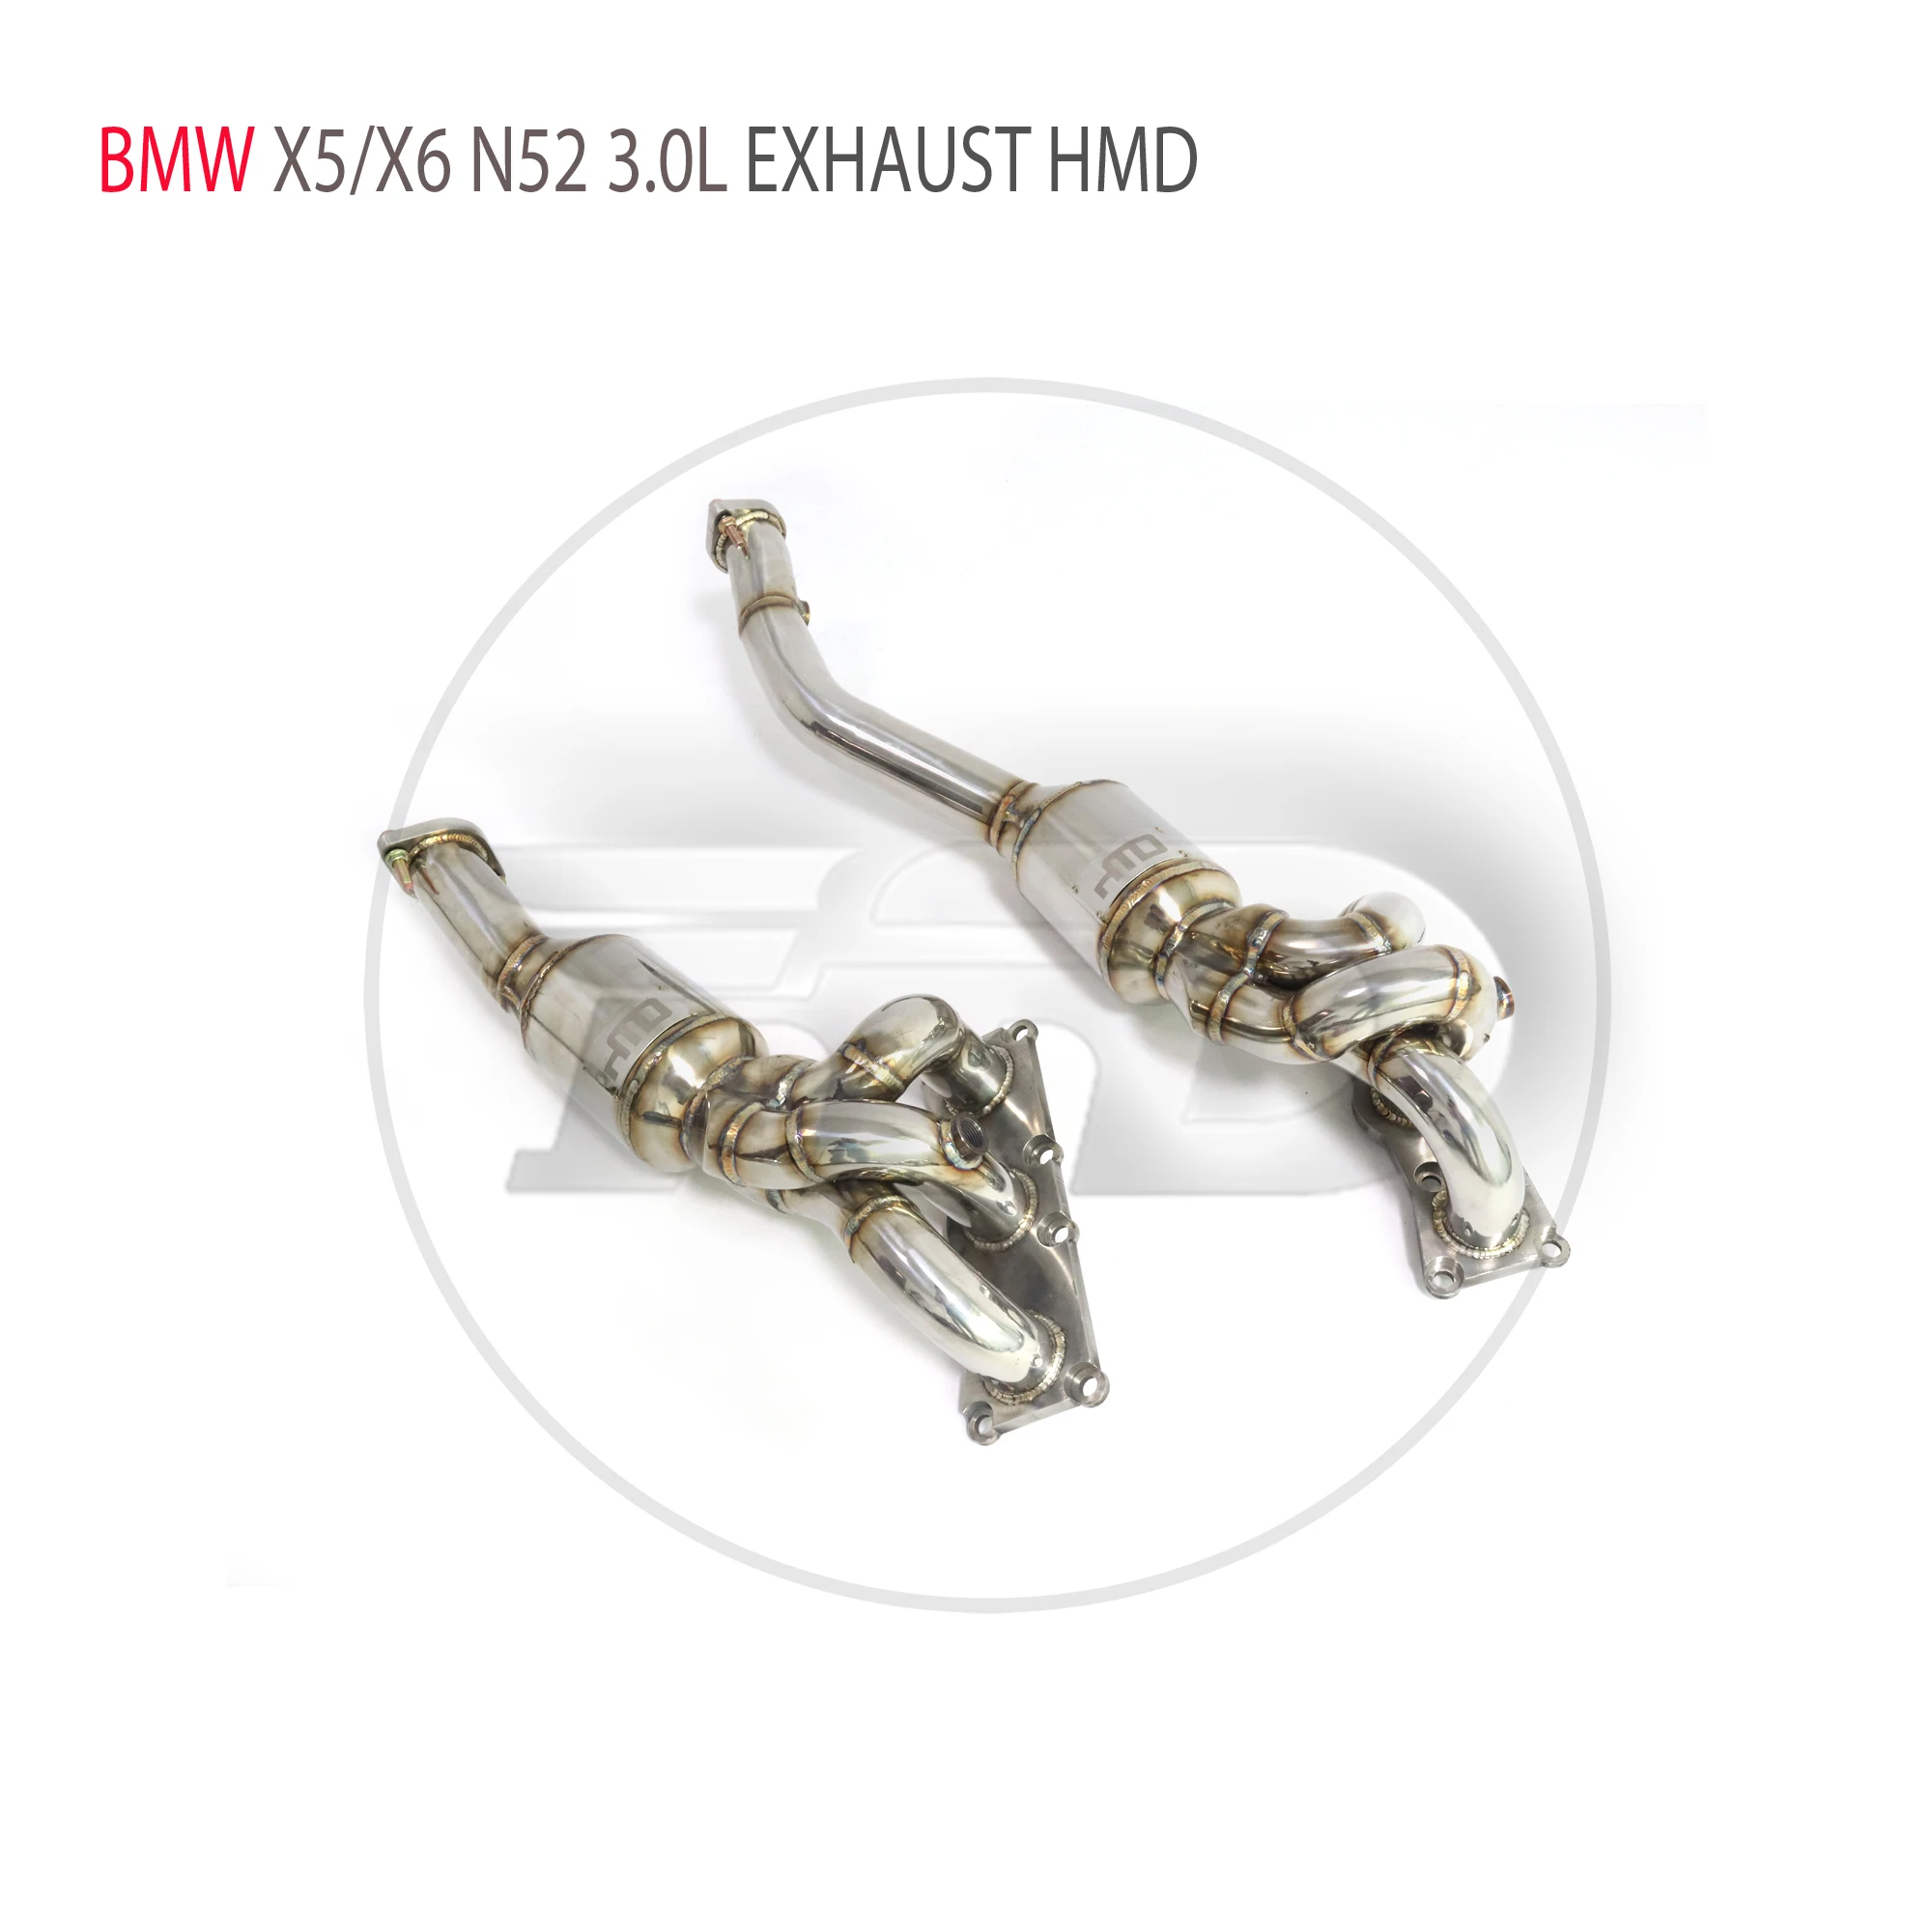 

HMD Exhaust System High Flow Performance Downpipe Manifold for BMW X5 X6 E70 E71 N52 3.0L Catalytic Converter Headers